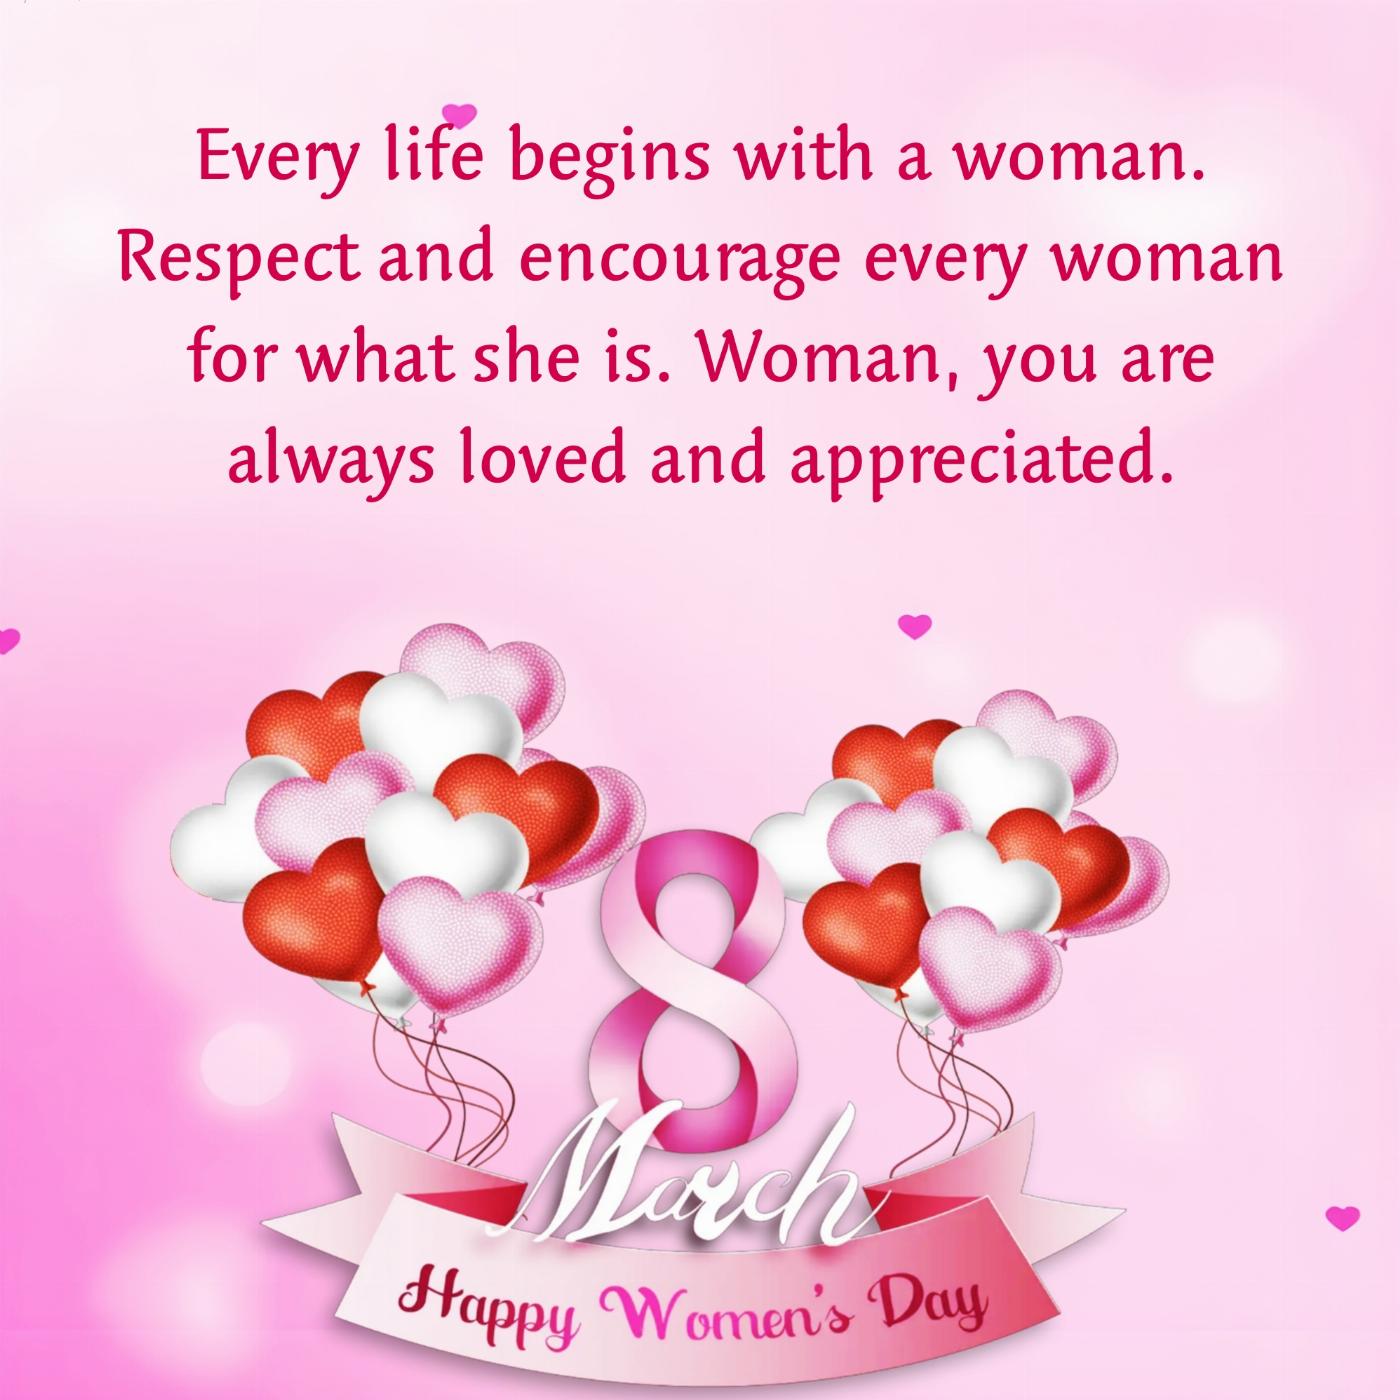 Every life begins with a woman Respect and encourage